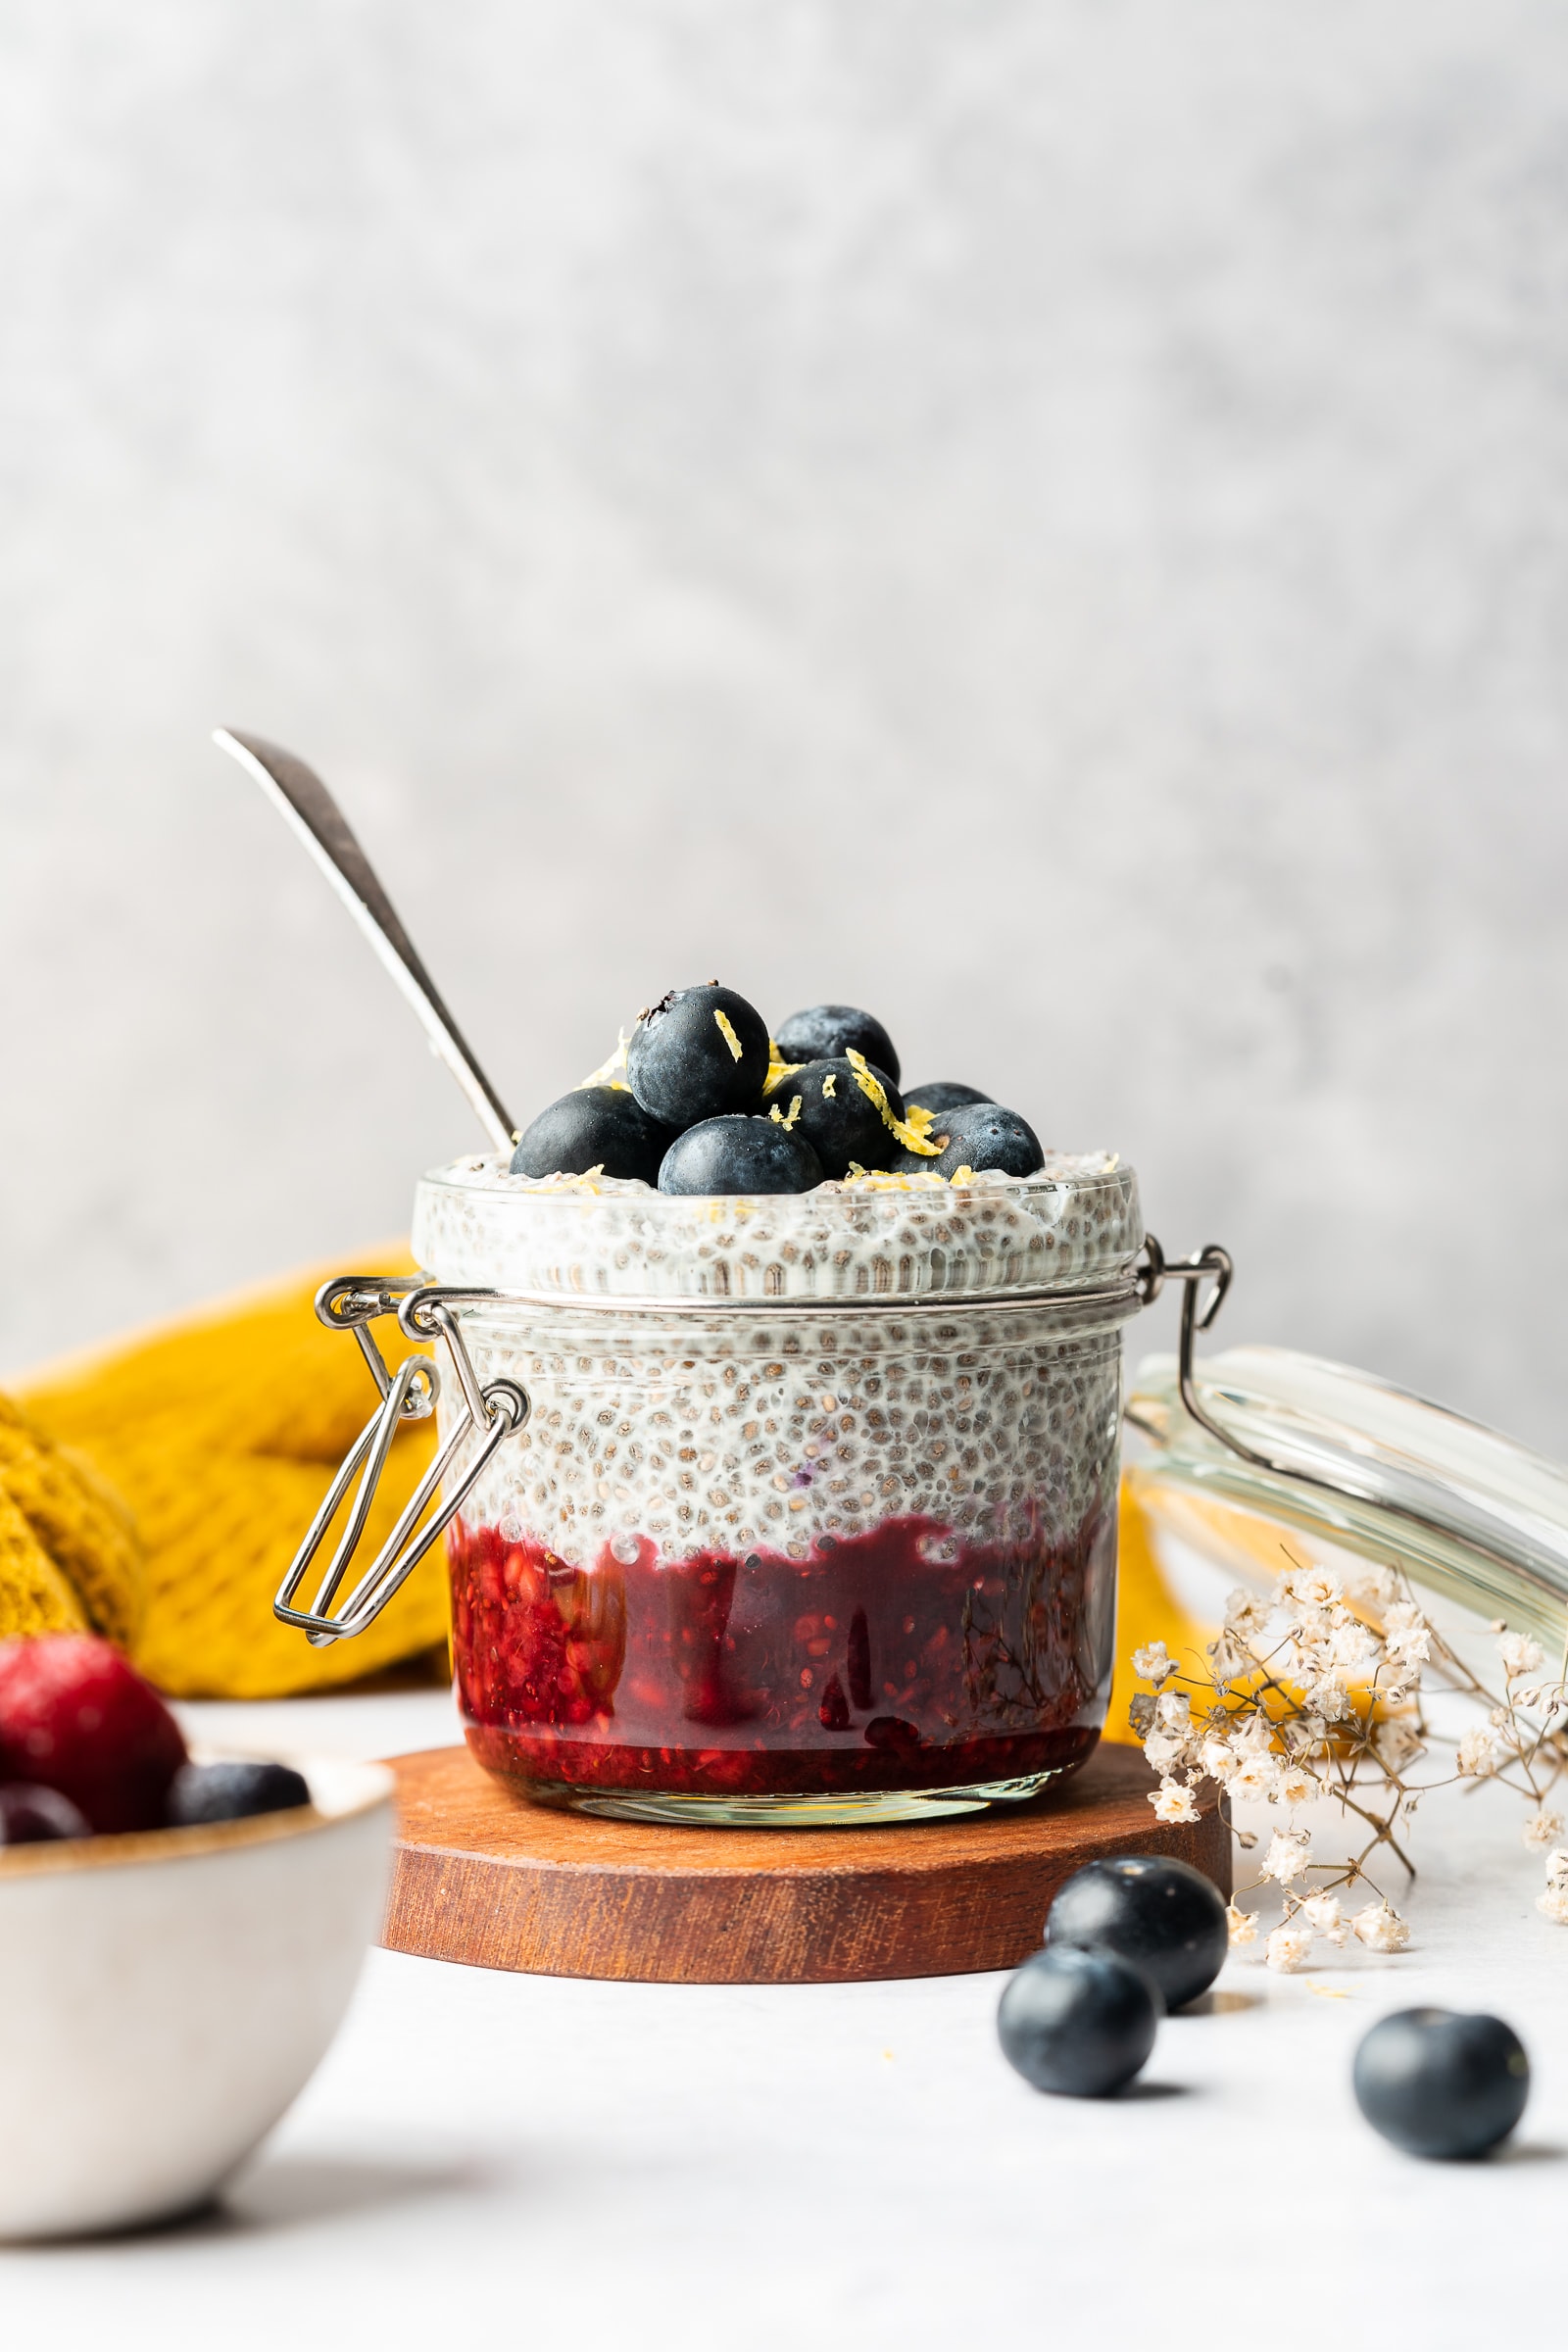 Chia pudding made with oat milk in a glass jar layered with fresh blueberries and berry jam.